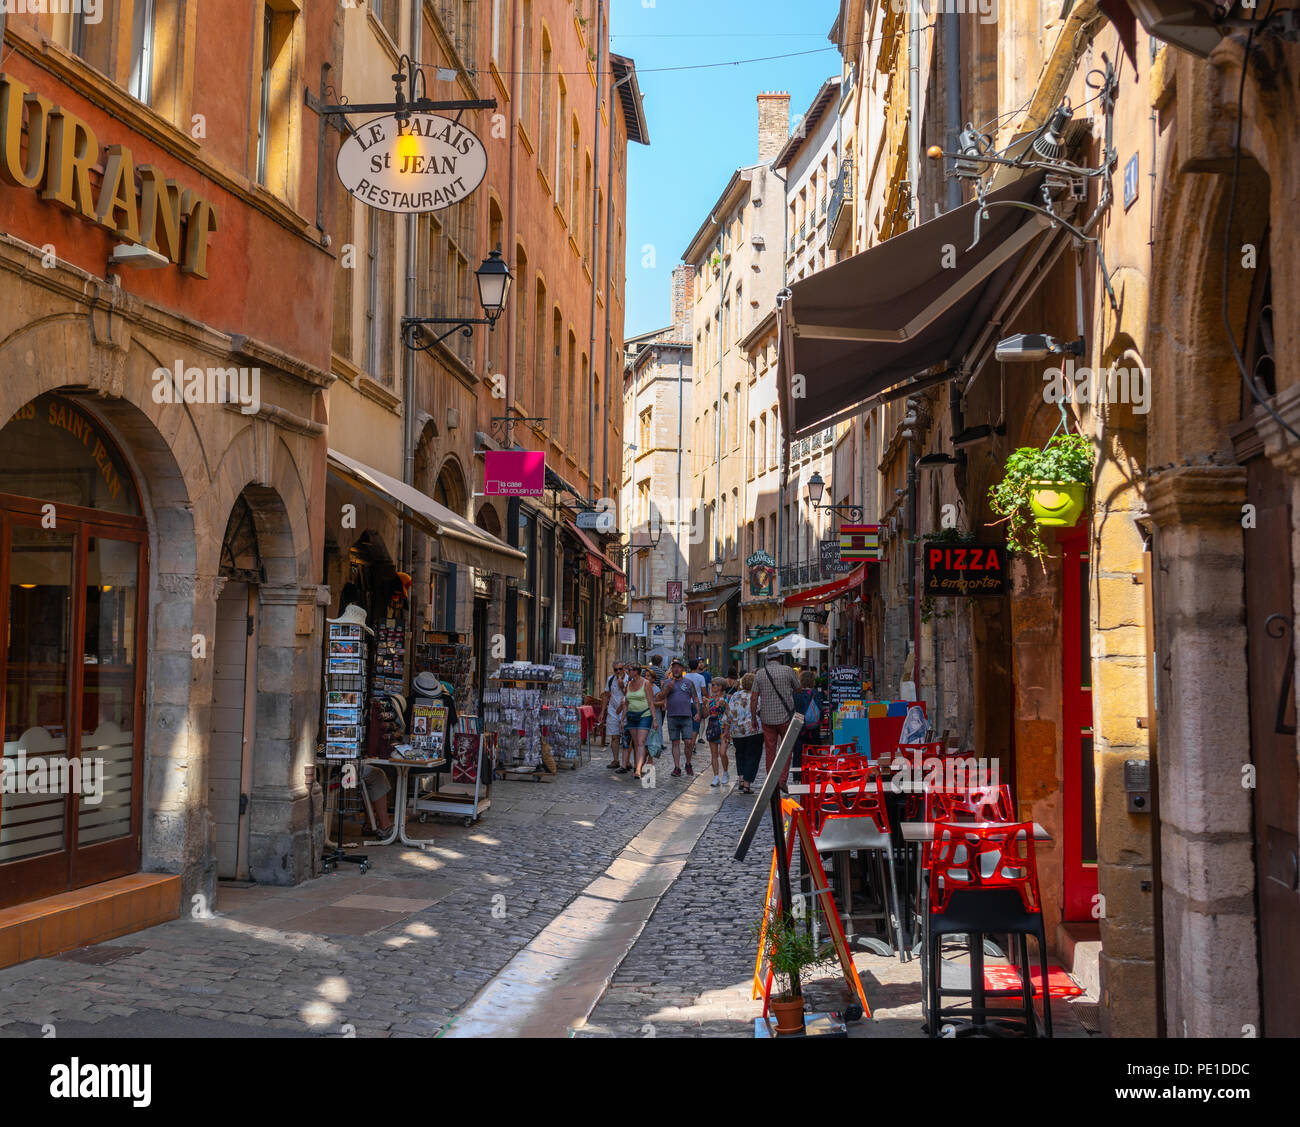 Lyon France, 2 August 2018: Vieux-Lyon old district pedestrian street view in Lyon France during summer with tourists Stock Photo